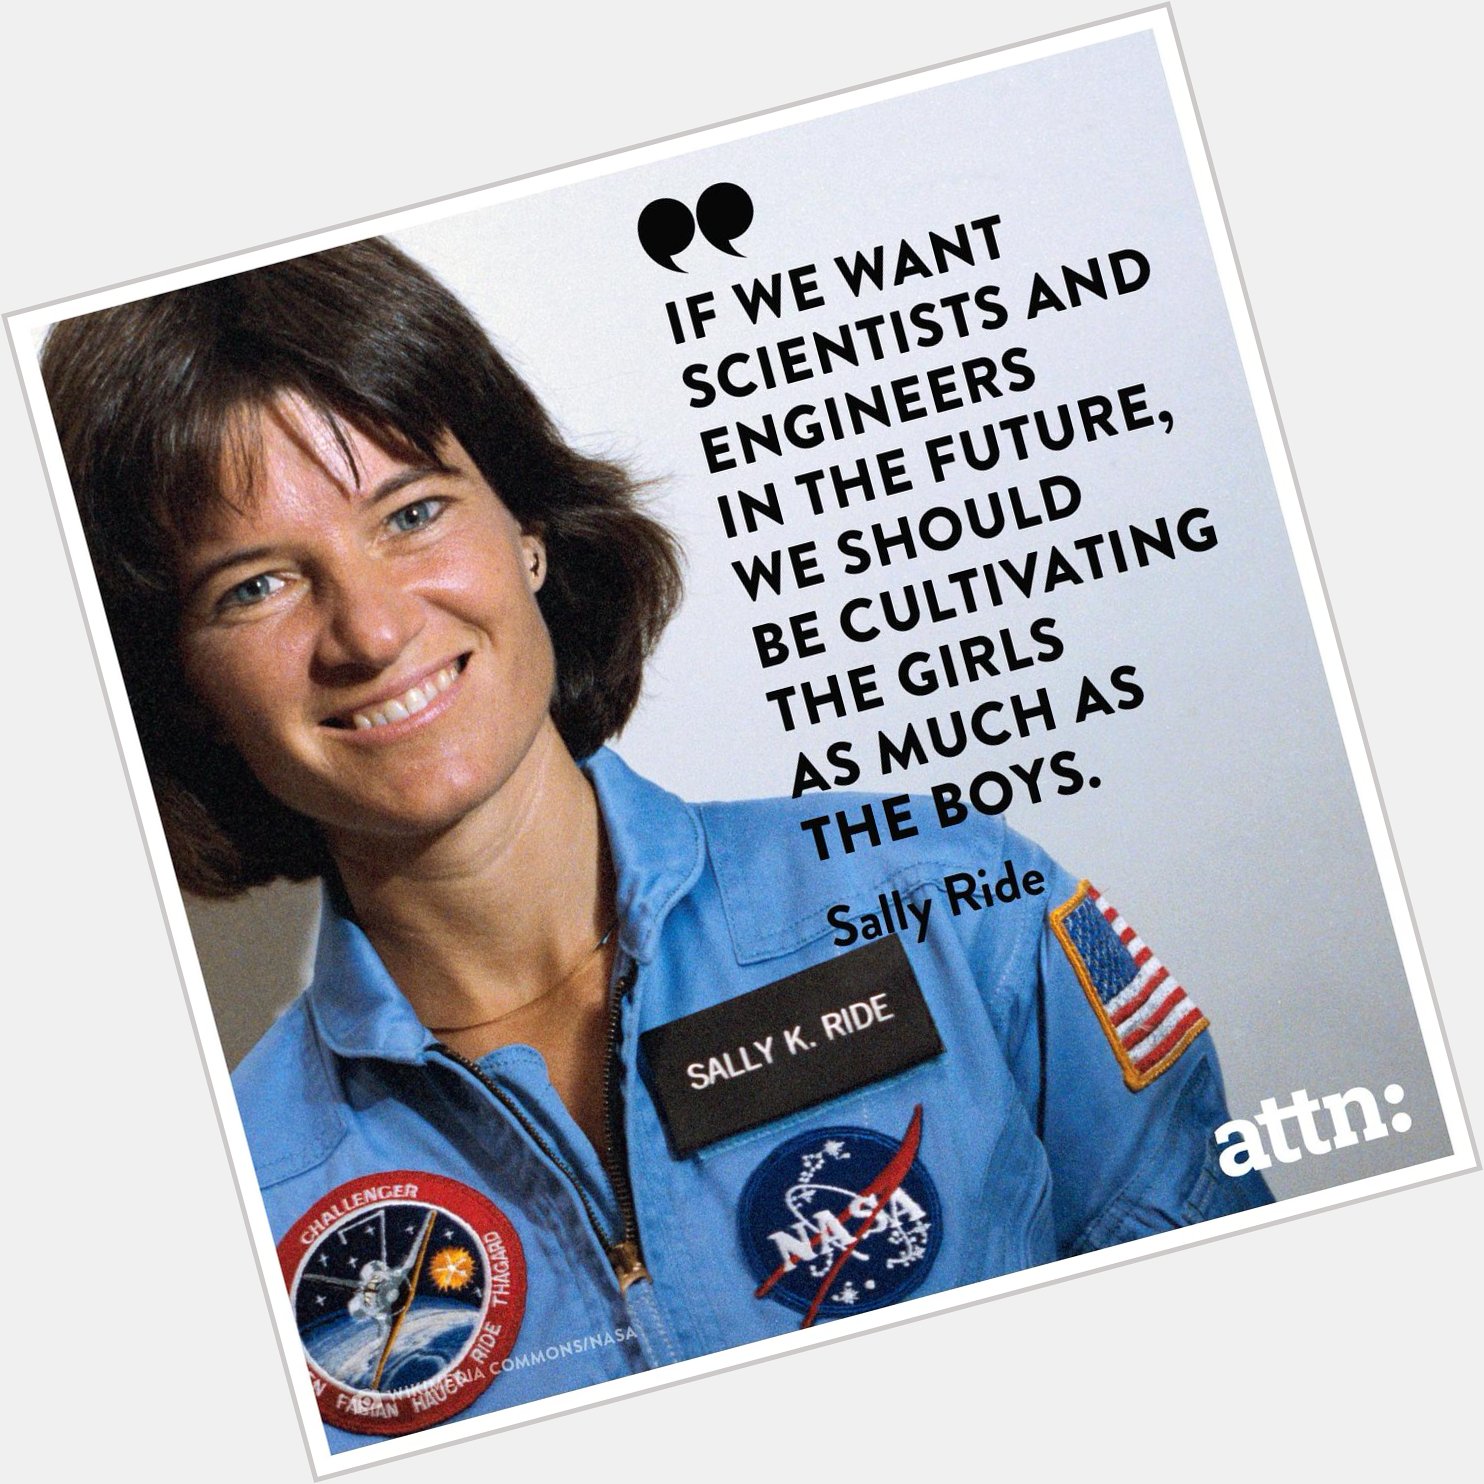 Happy birthday to Sally Ride! A pioneer who hits it right on the head. 